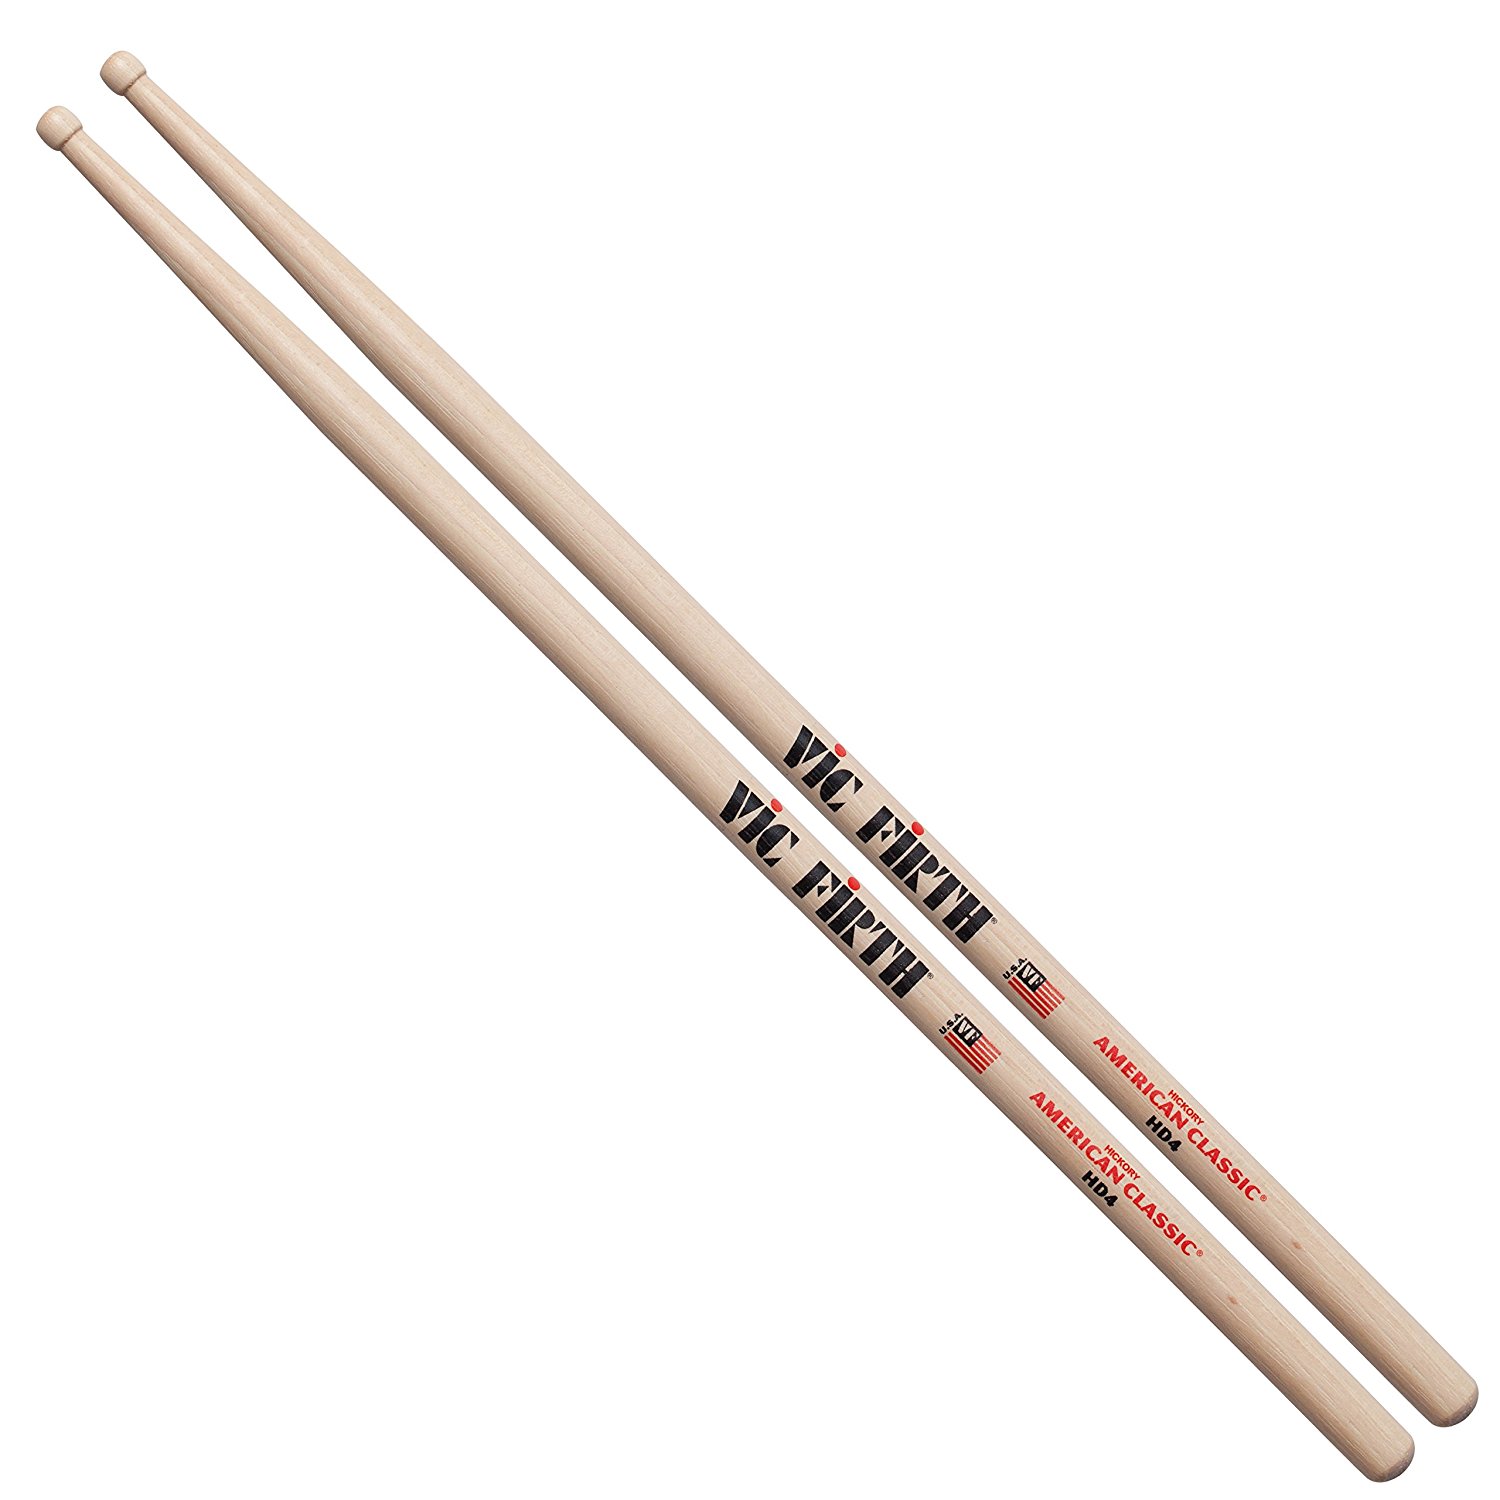 Vic Firth American Classic Hd4 Hickory - Drum stick - Variation 1